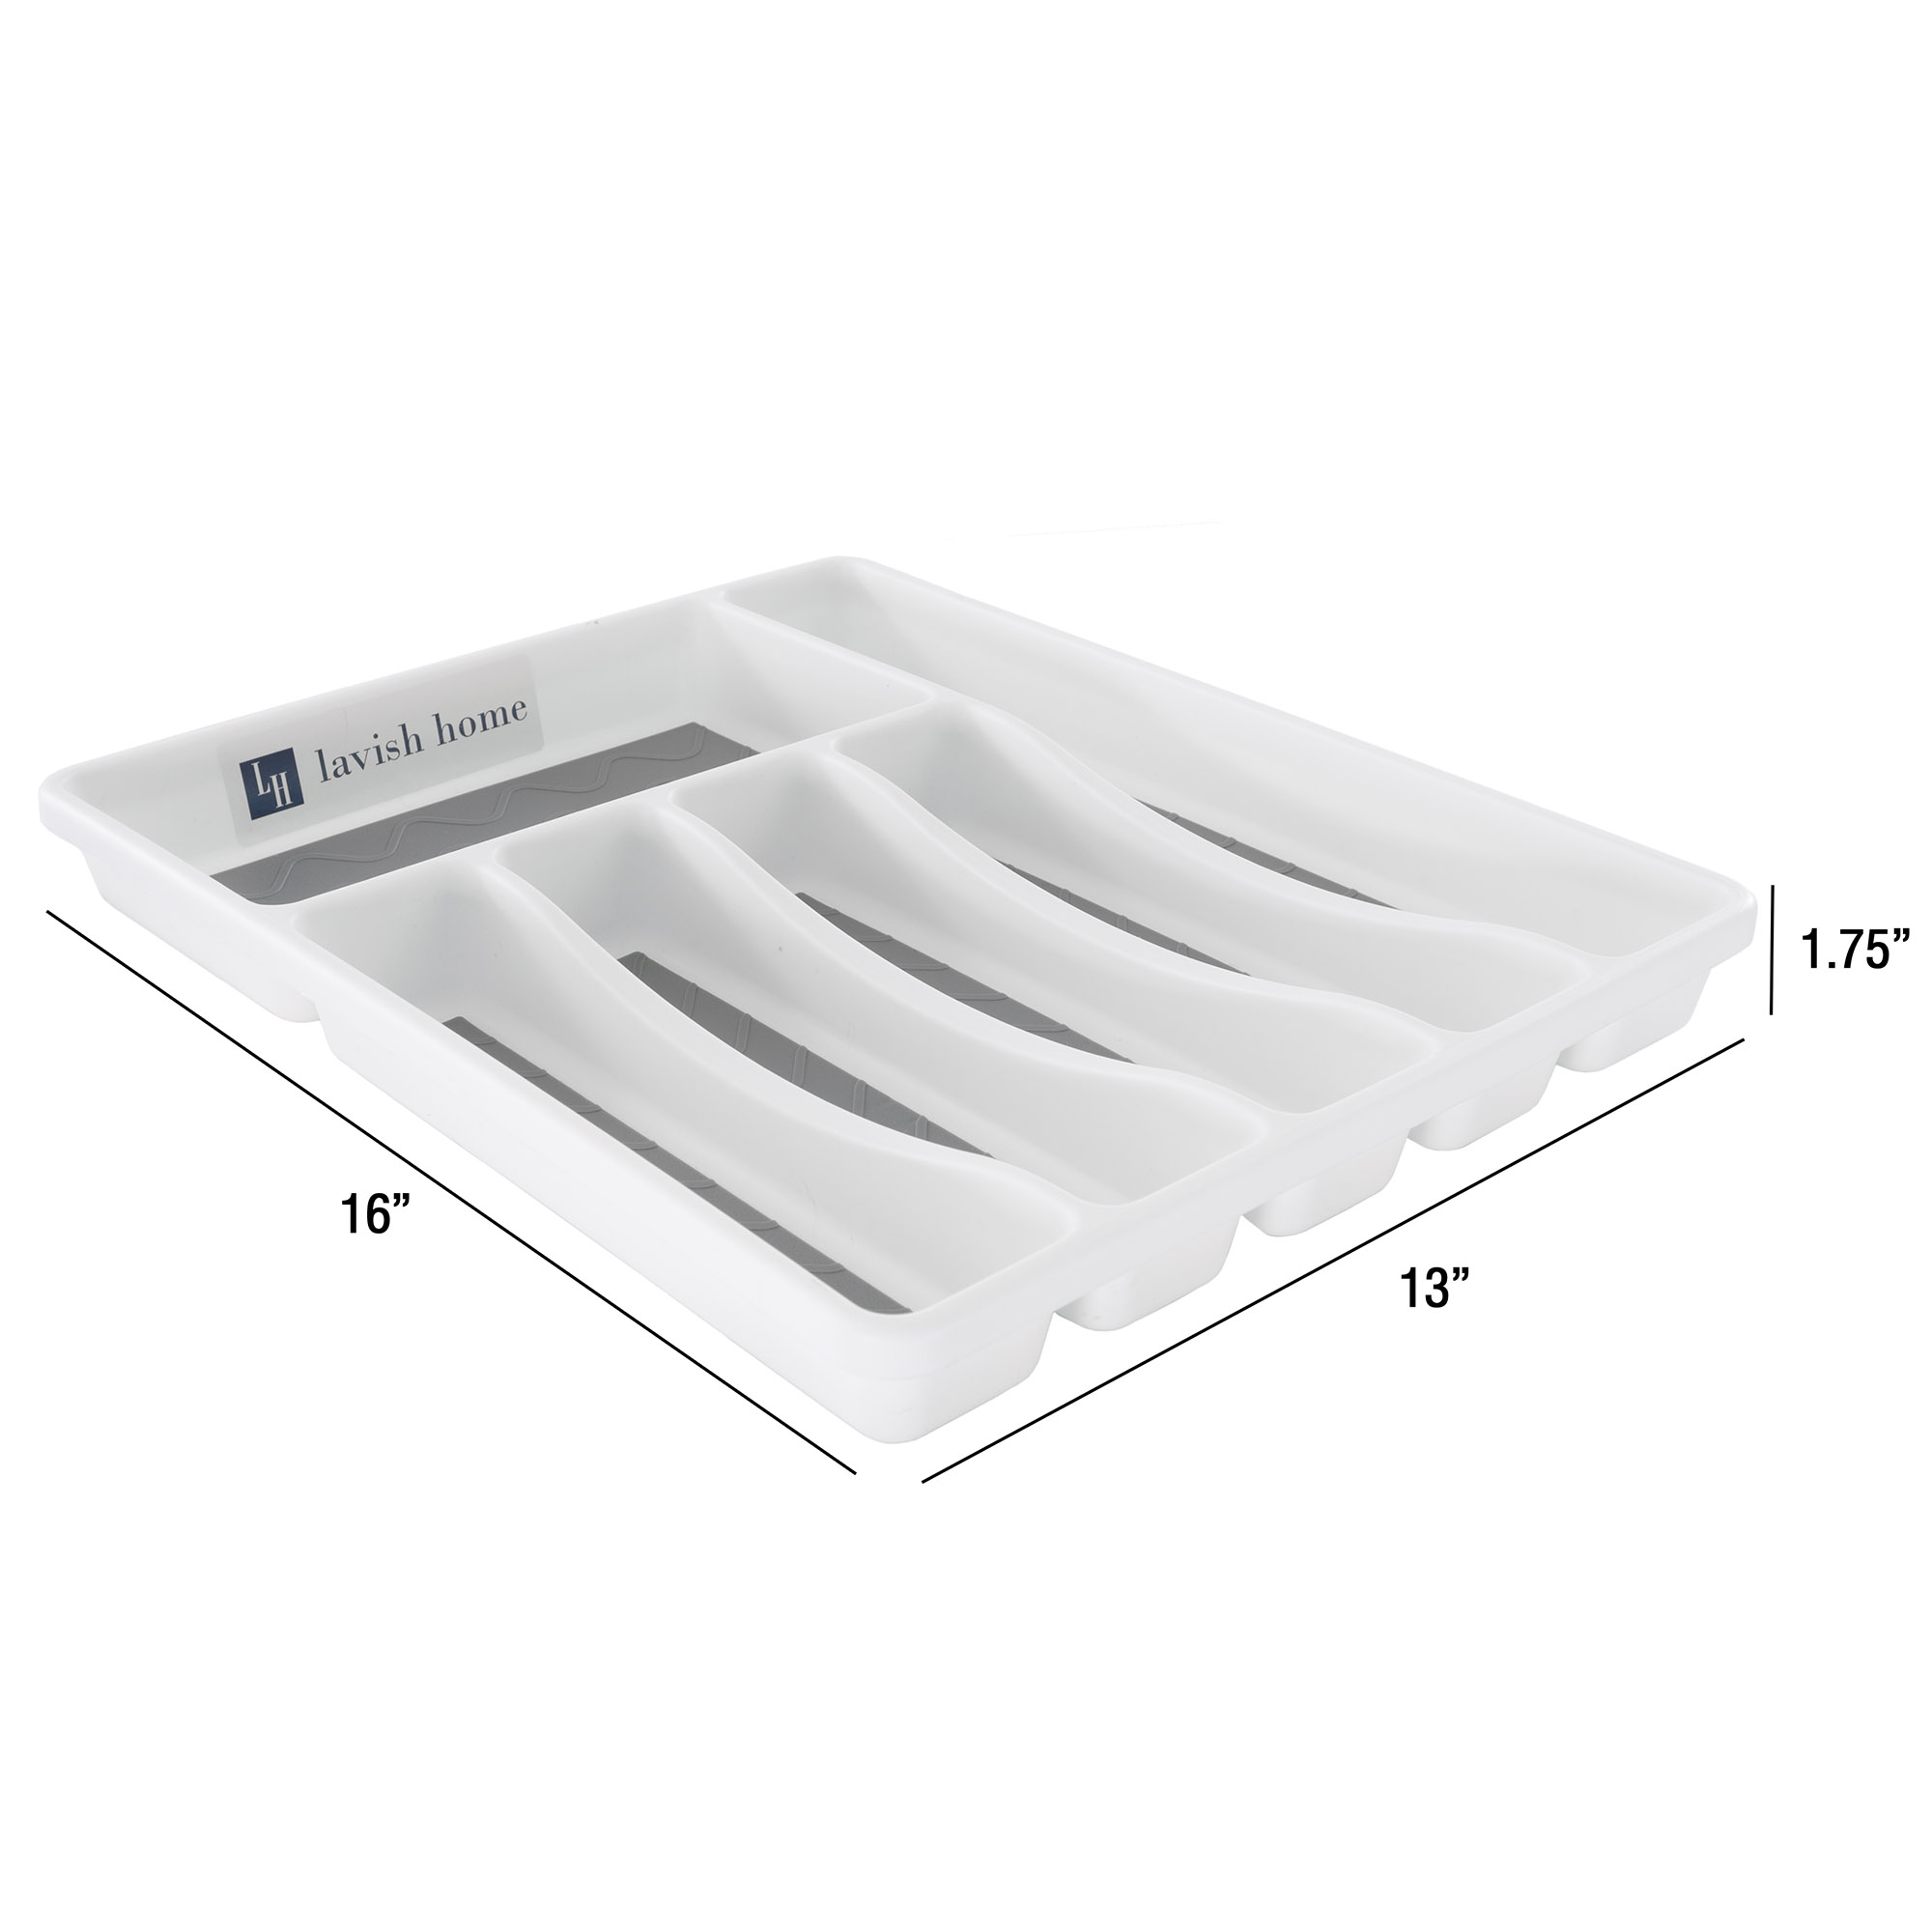 Lavish Home Silverware Drawer Organizer with 6 Sections and Nonslip Tray - image 4 of 4